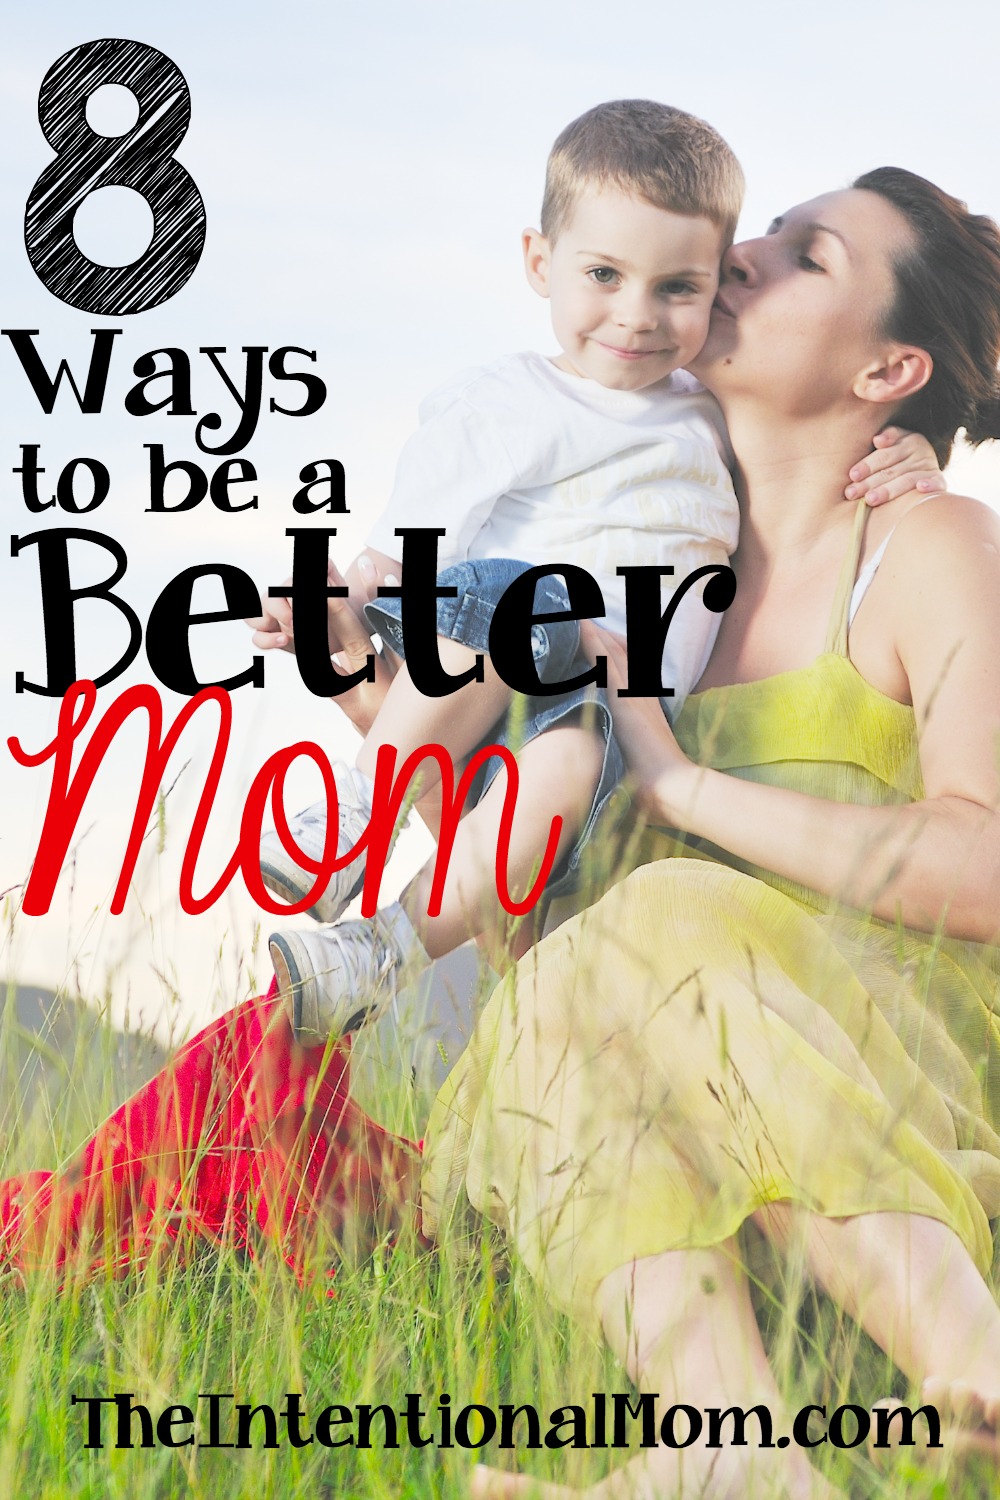 8 Ways to Be a Better Mom